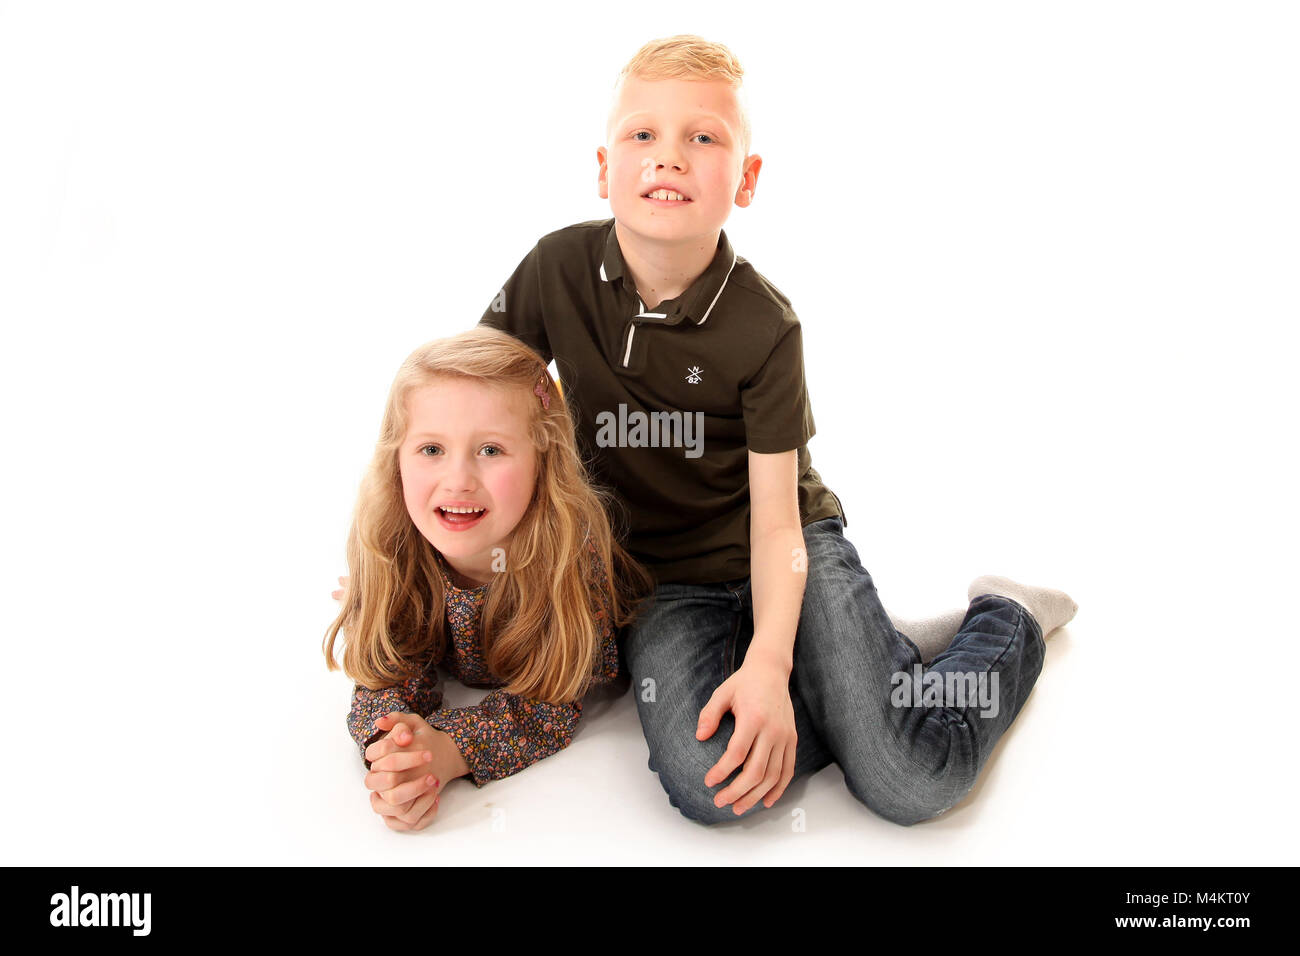 brother and sister, laughing and having fun, happy childhood Stock Photo